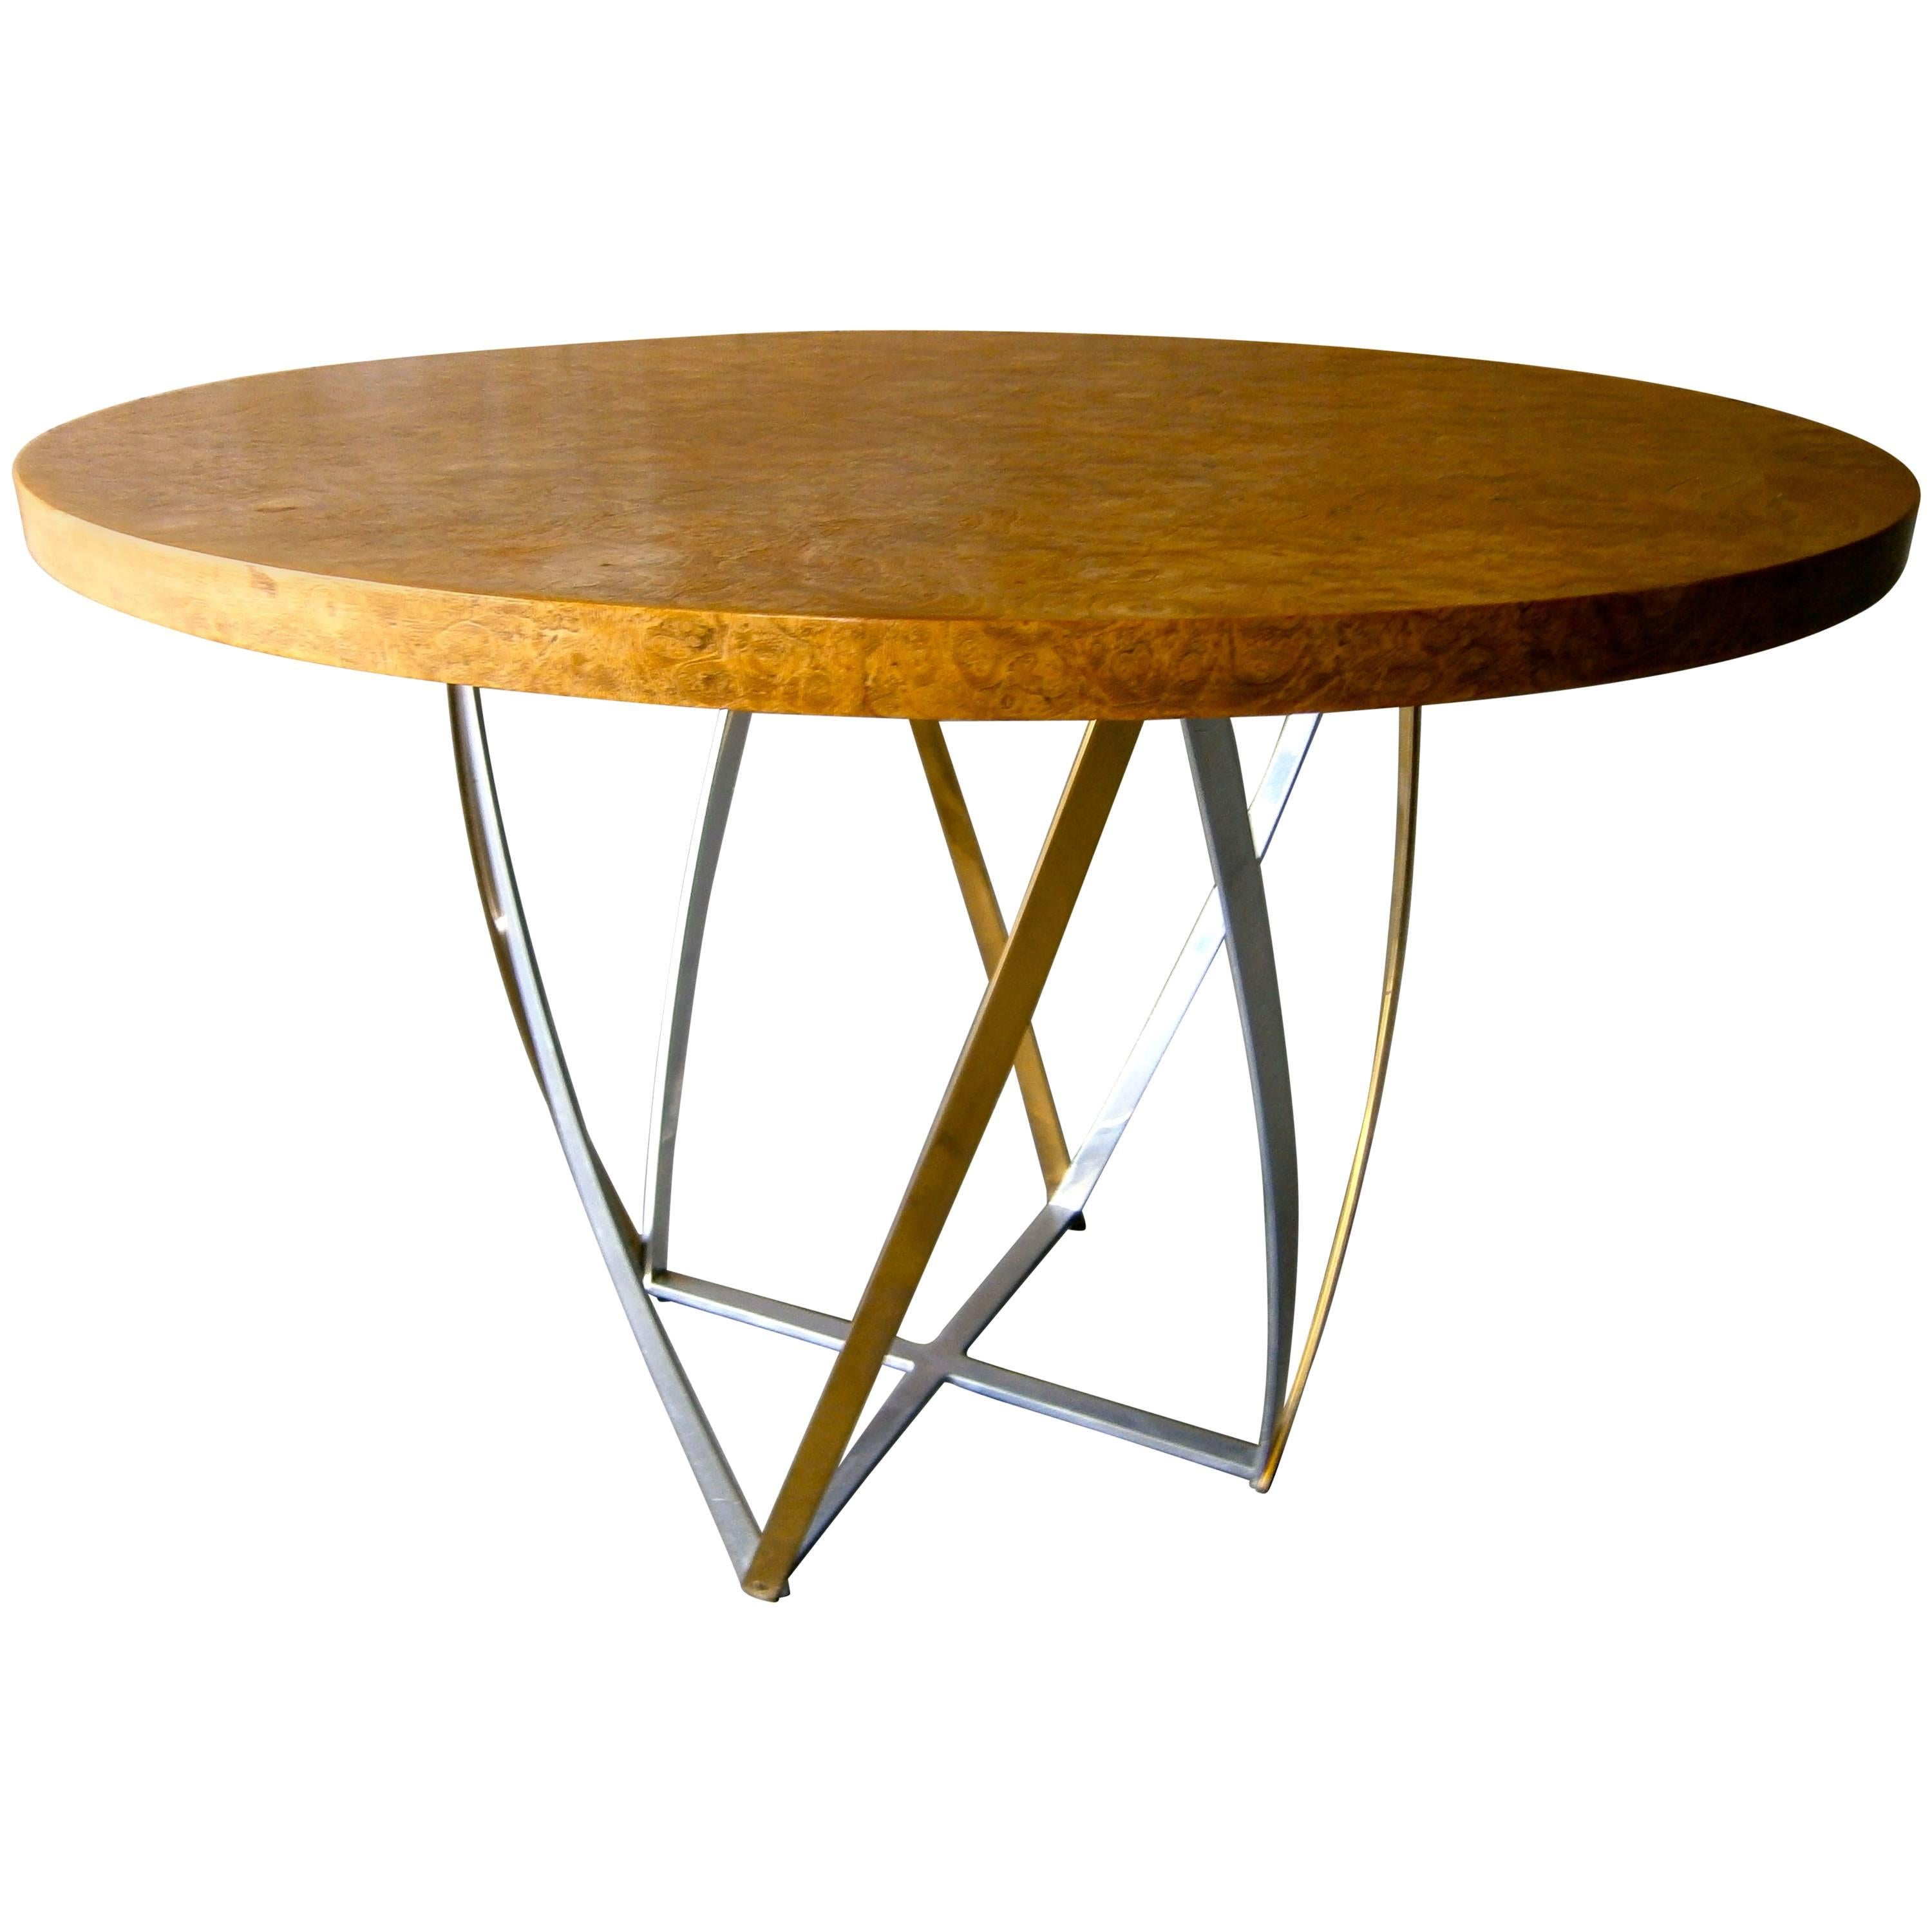 Aluminum and Brass Based Burled wood Circular Table by John Vesey  C. 1960s For Sale